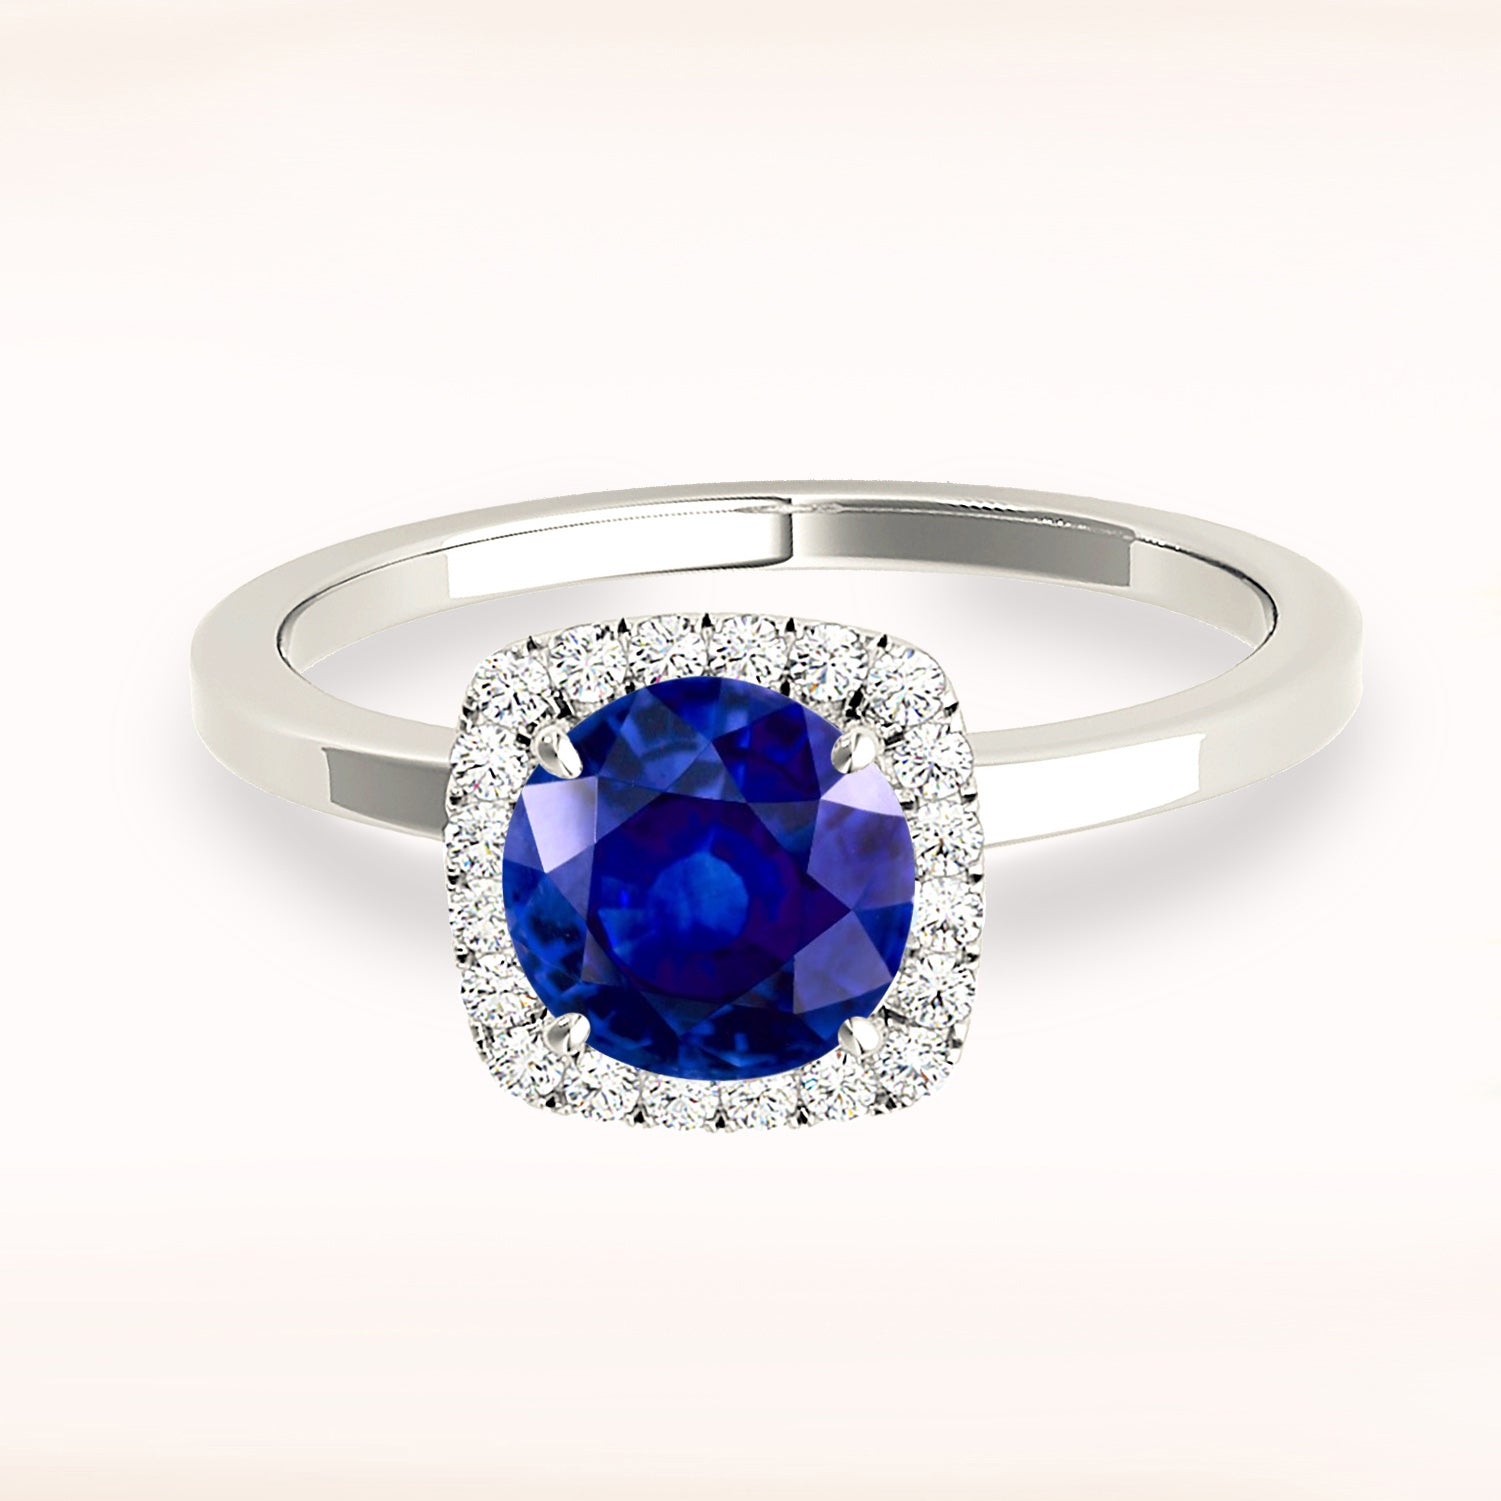 1.80 ct. Genuine Blue Sapphire Solitaire Band Halo Ring With 0.20 ctw. Diamonds-in 14K/18K White, Yellow, Rose Gold and Platinum - Christmas Jewelry Gift -VIRABYANI